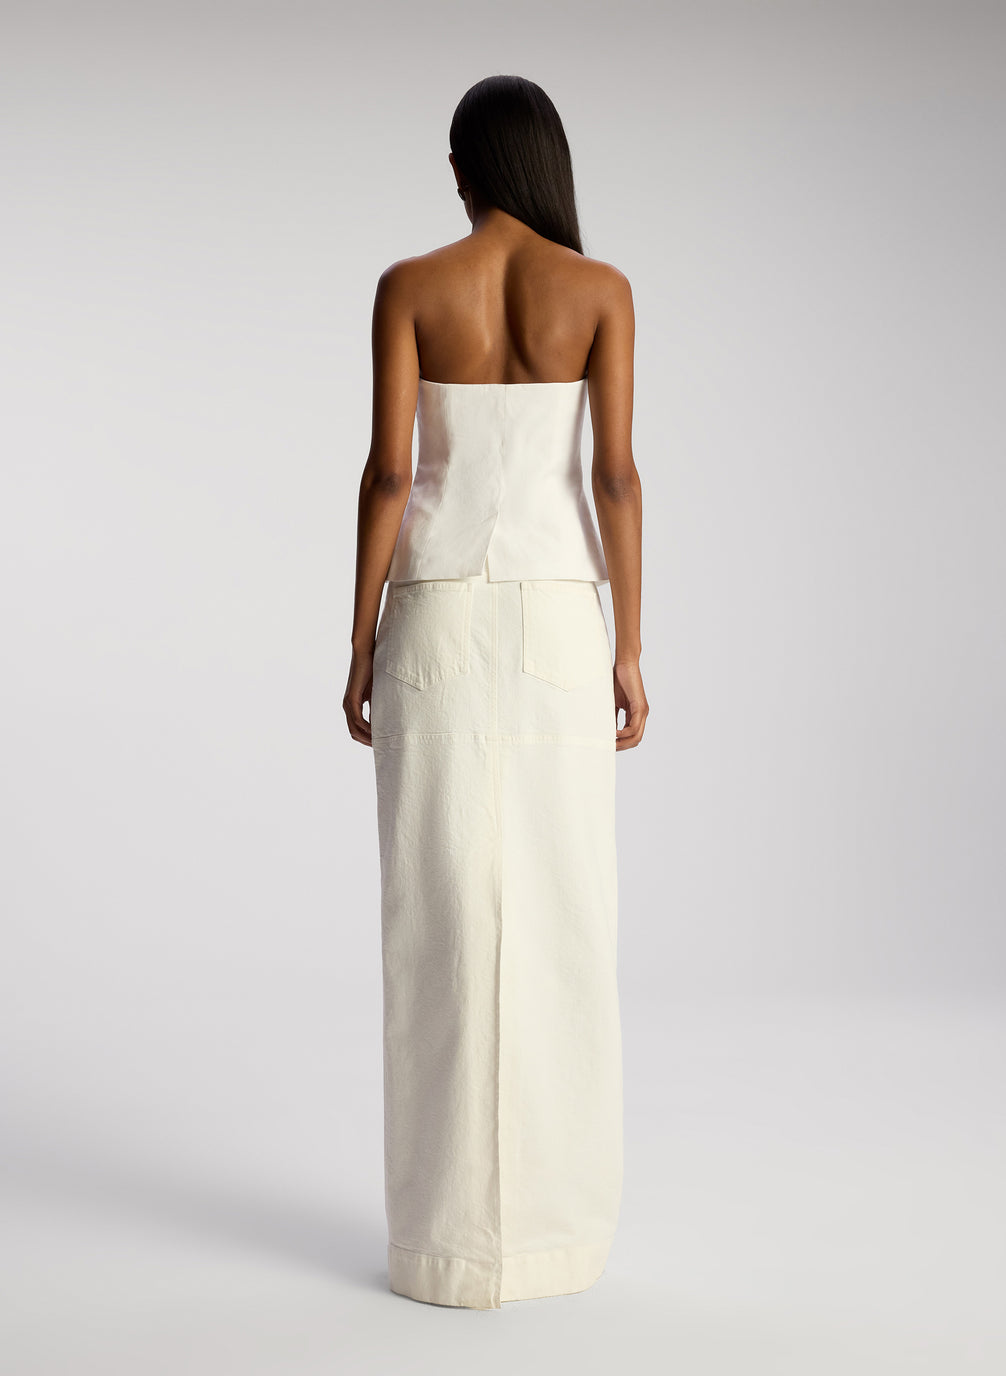 back view of woman wearing white strapless top and white maxi skirt